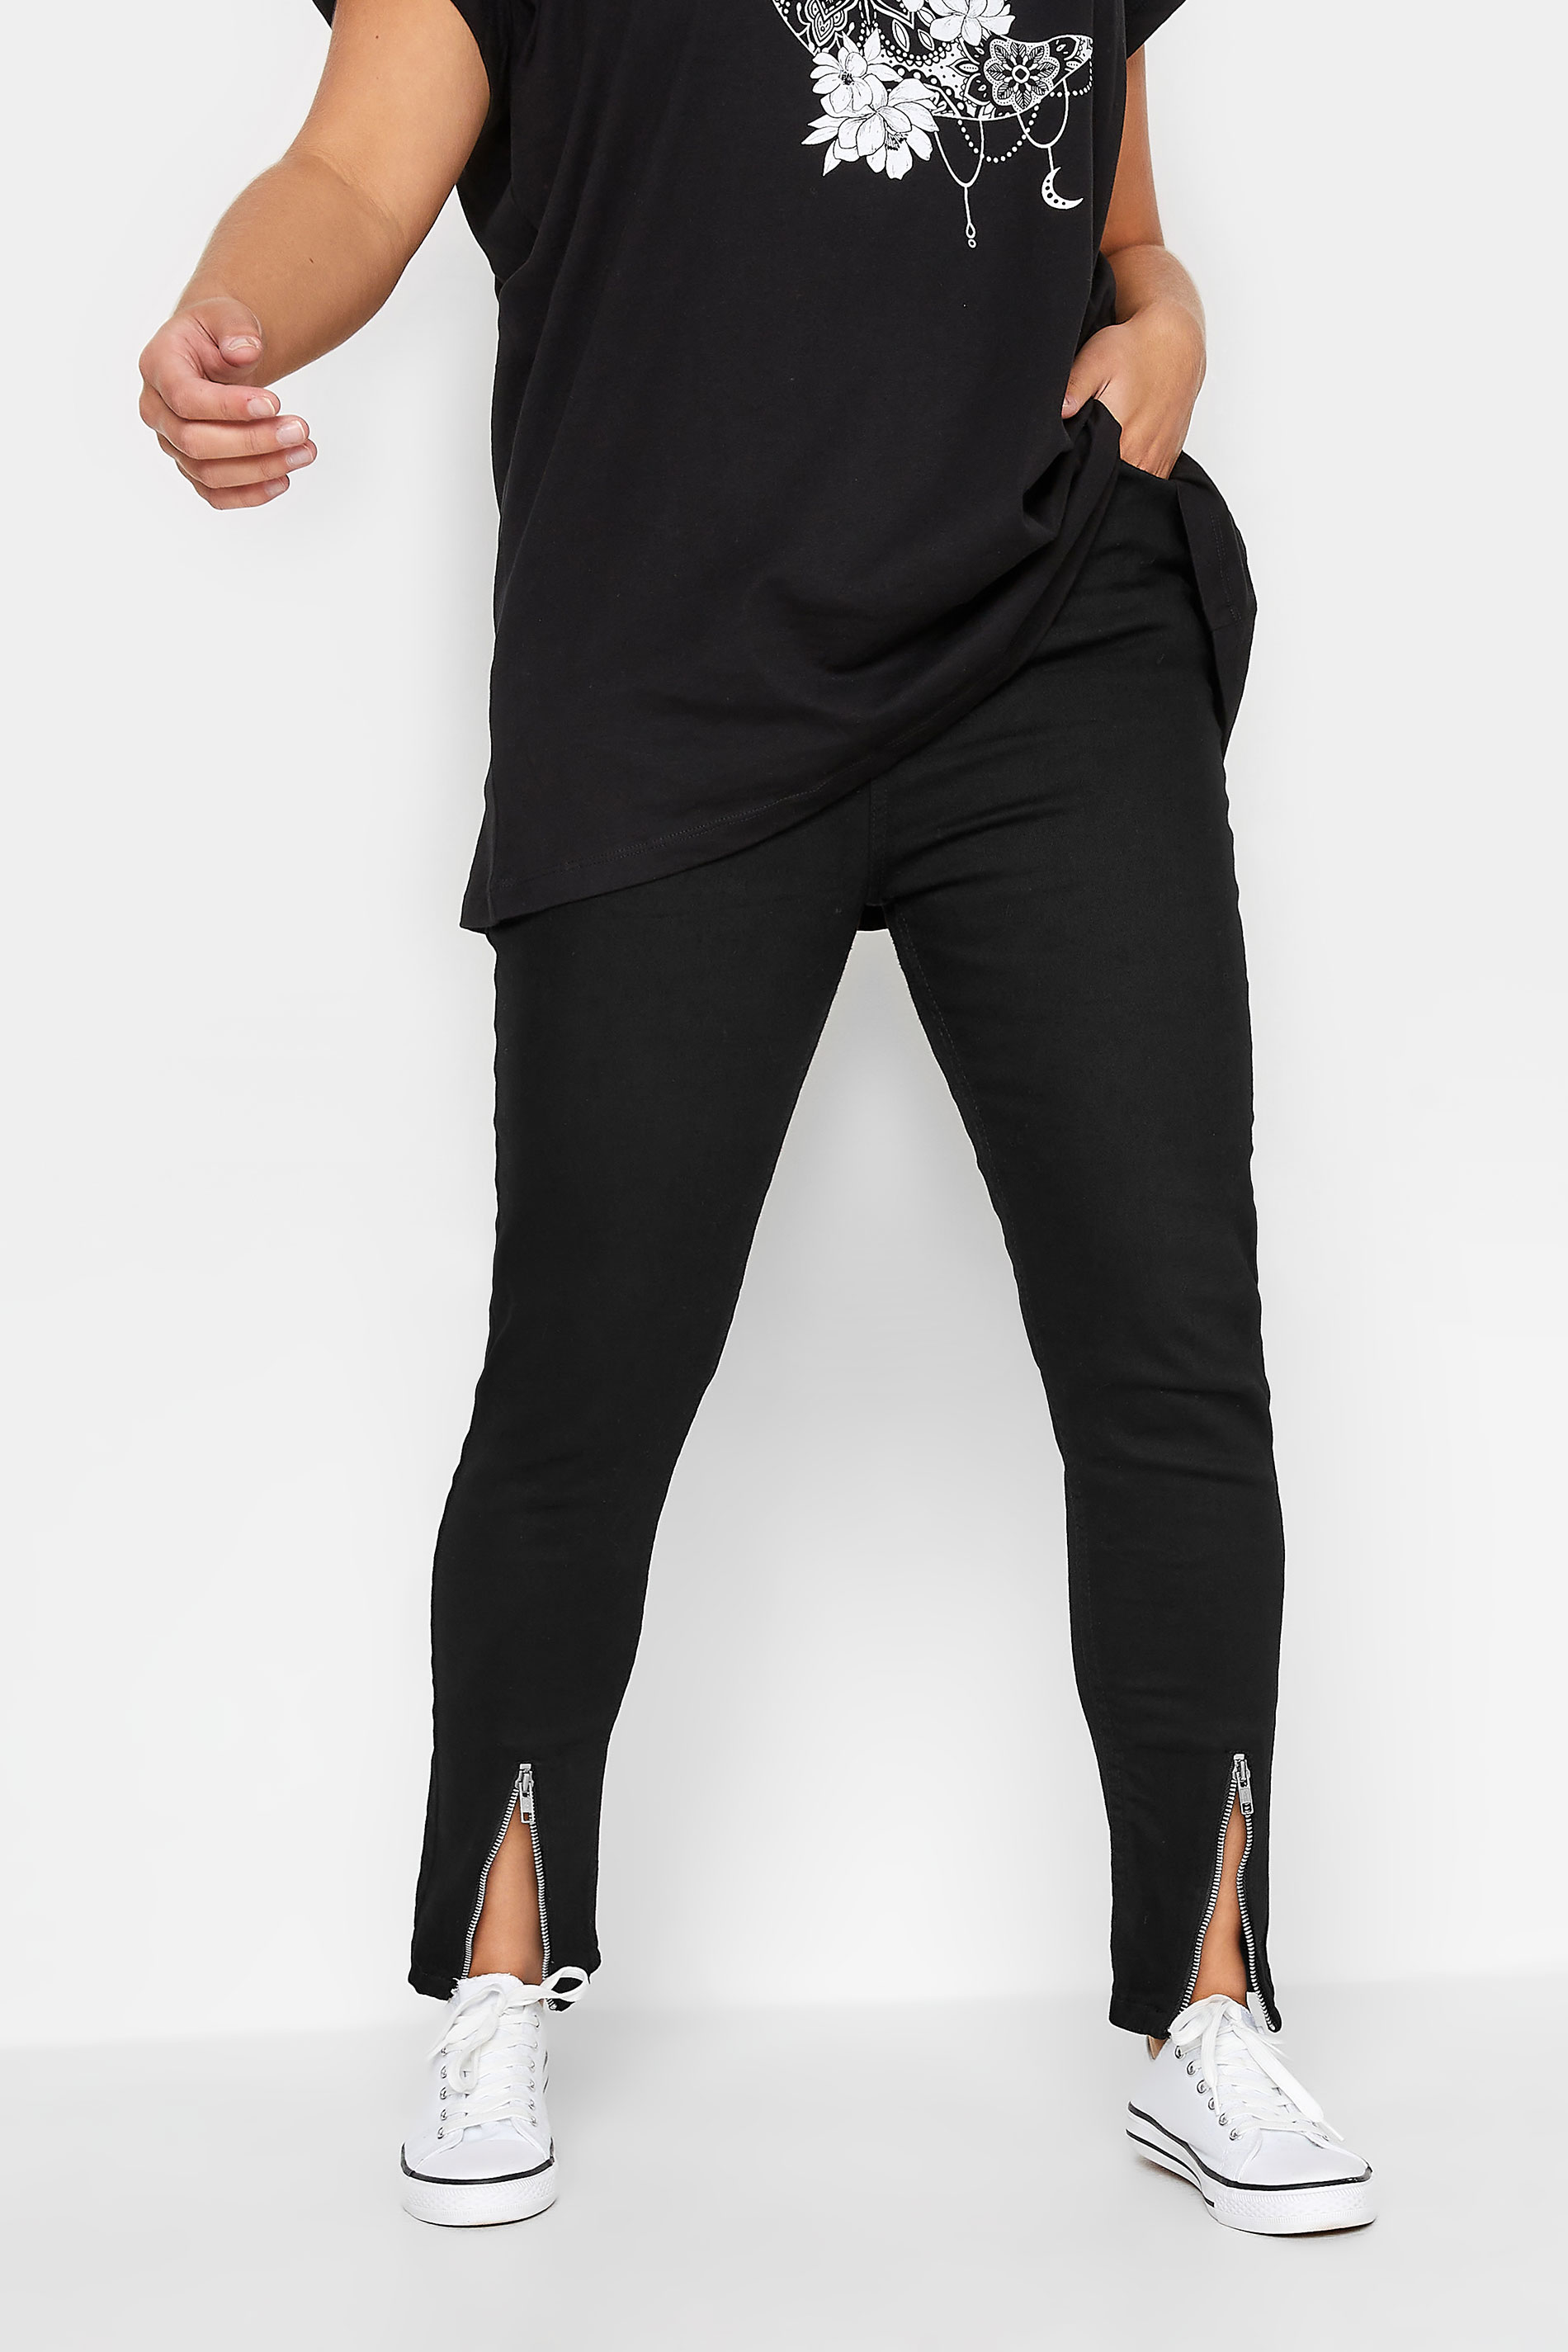 Plus Size Black Zip Front Skinny AVA Jeans | Yours Clothing 1